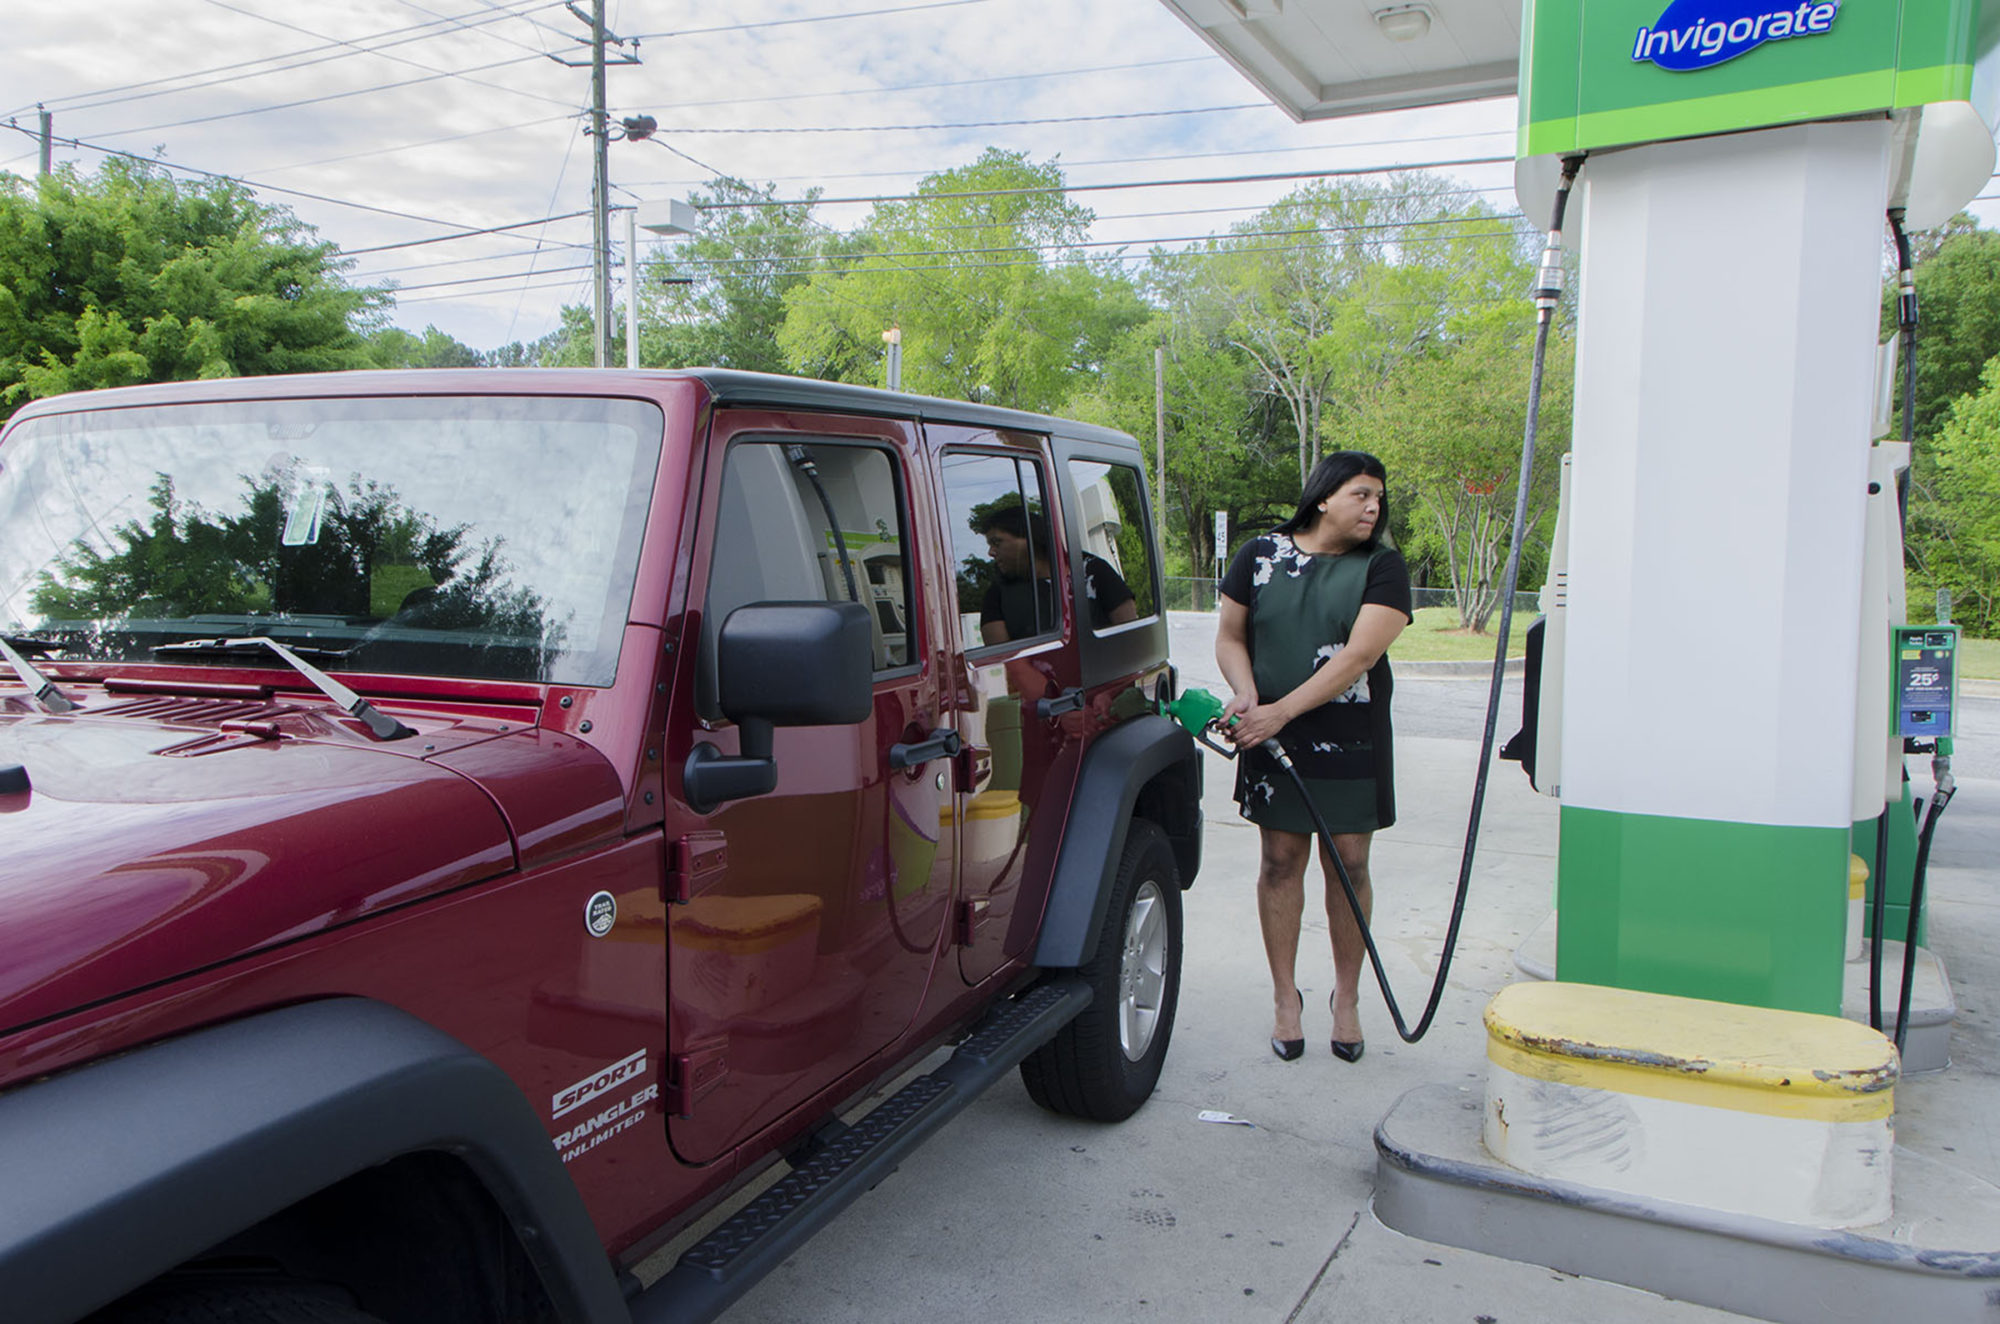 A woman pumps gas at a gas station